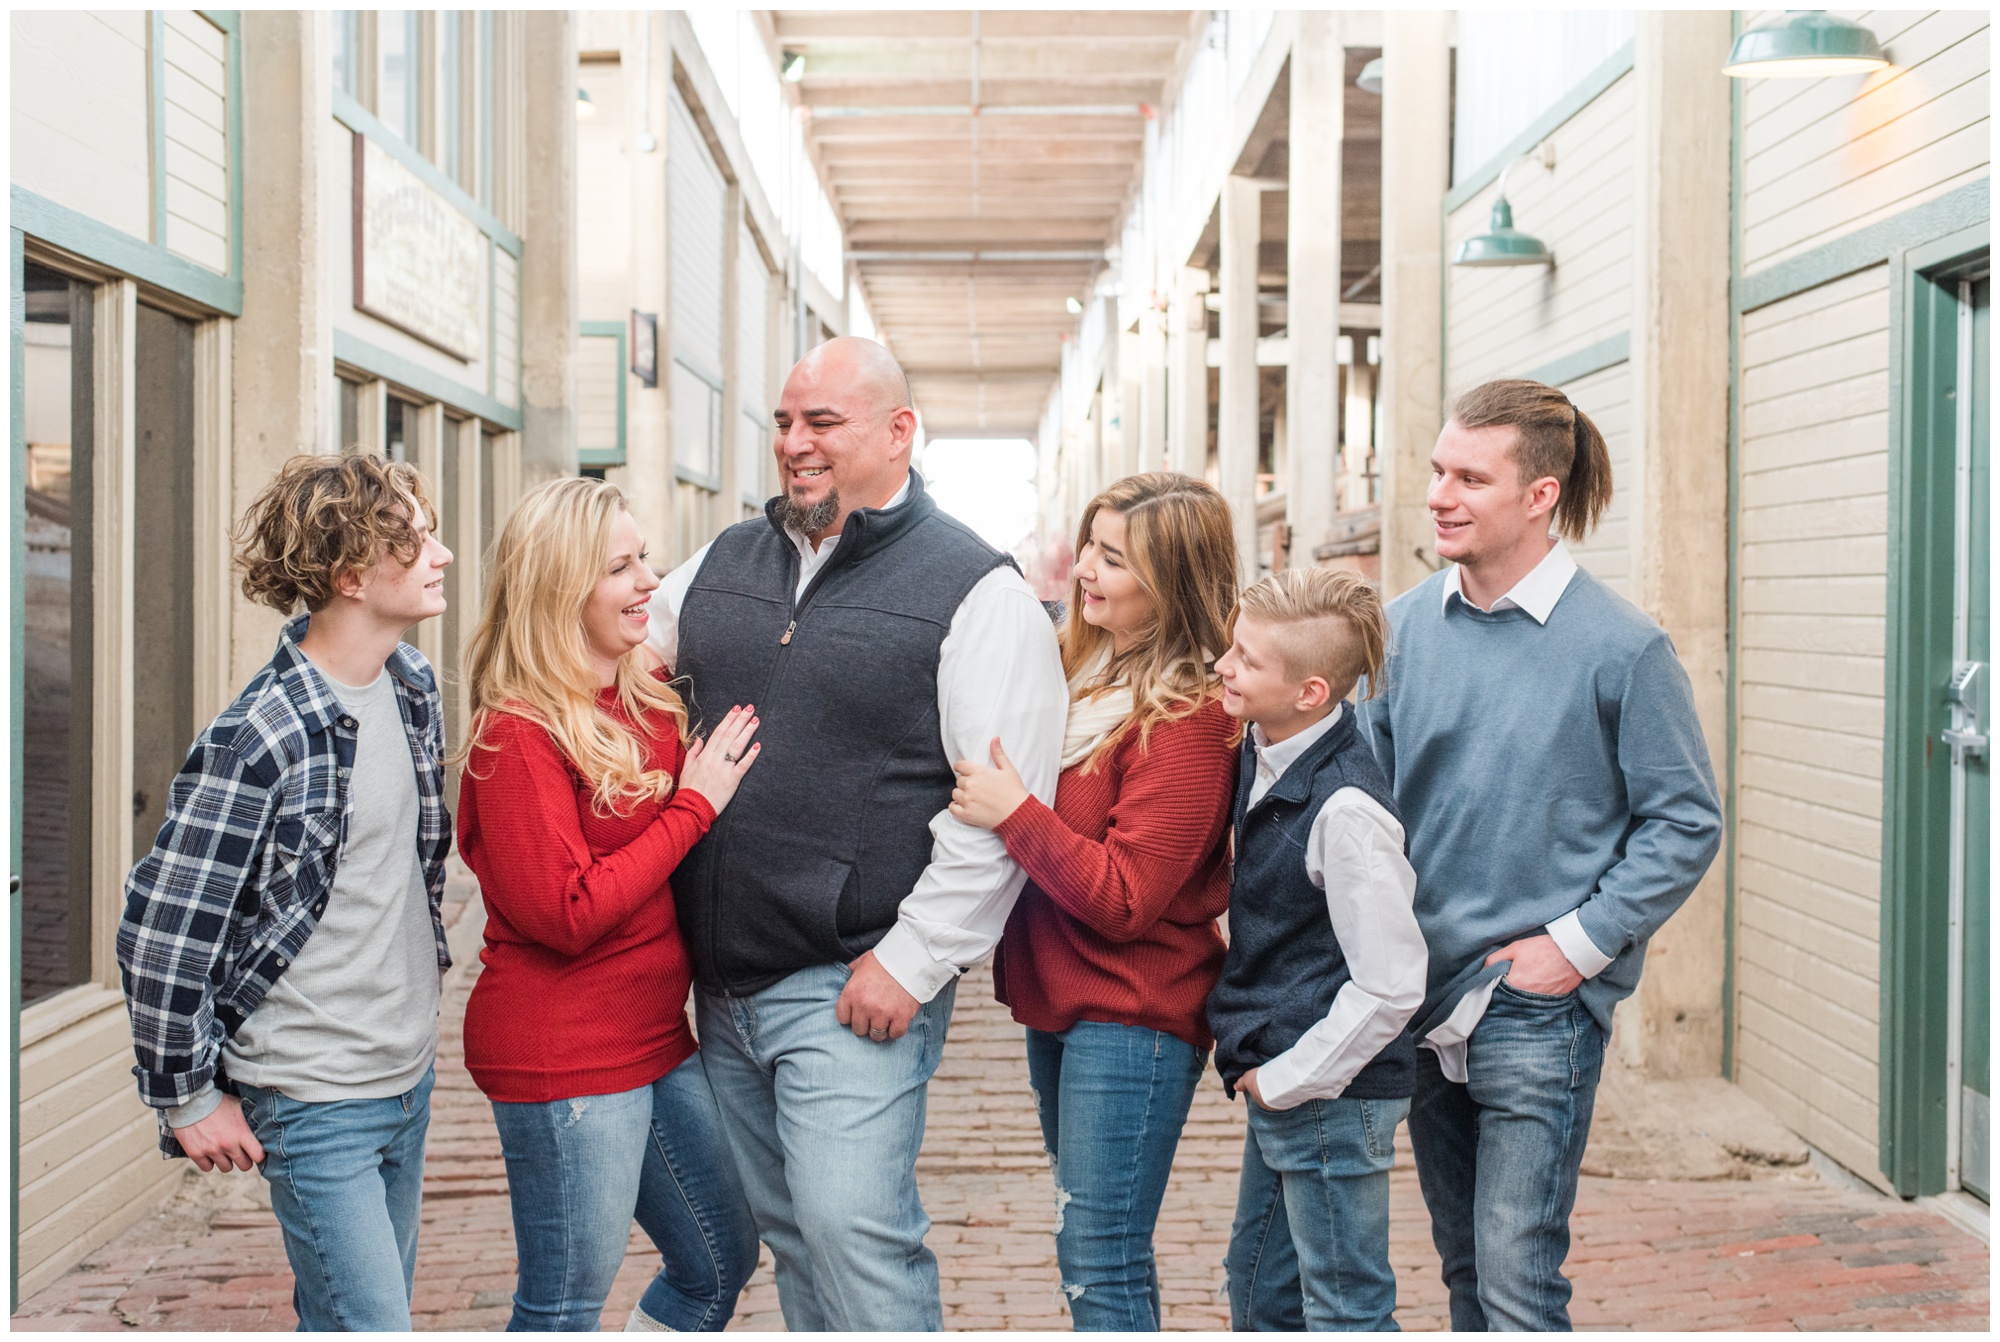 Fort Worth Stockyards | Fort Worth Stockyards Family Session | Lauren Grimes Photography | Fort Worth Family Photographer